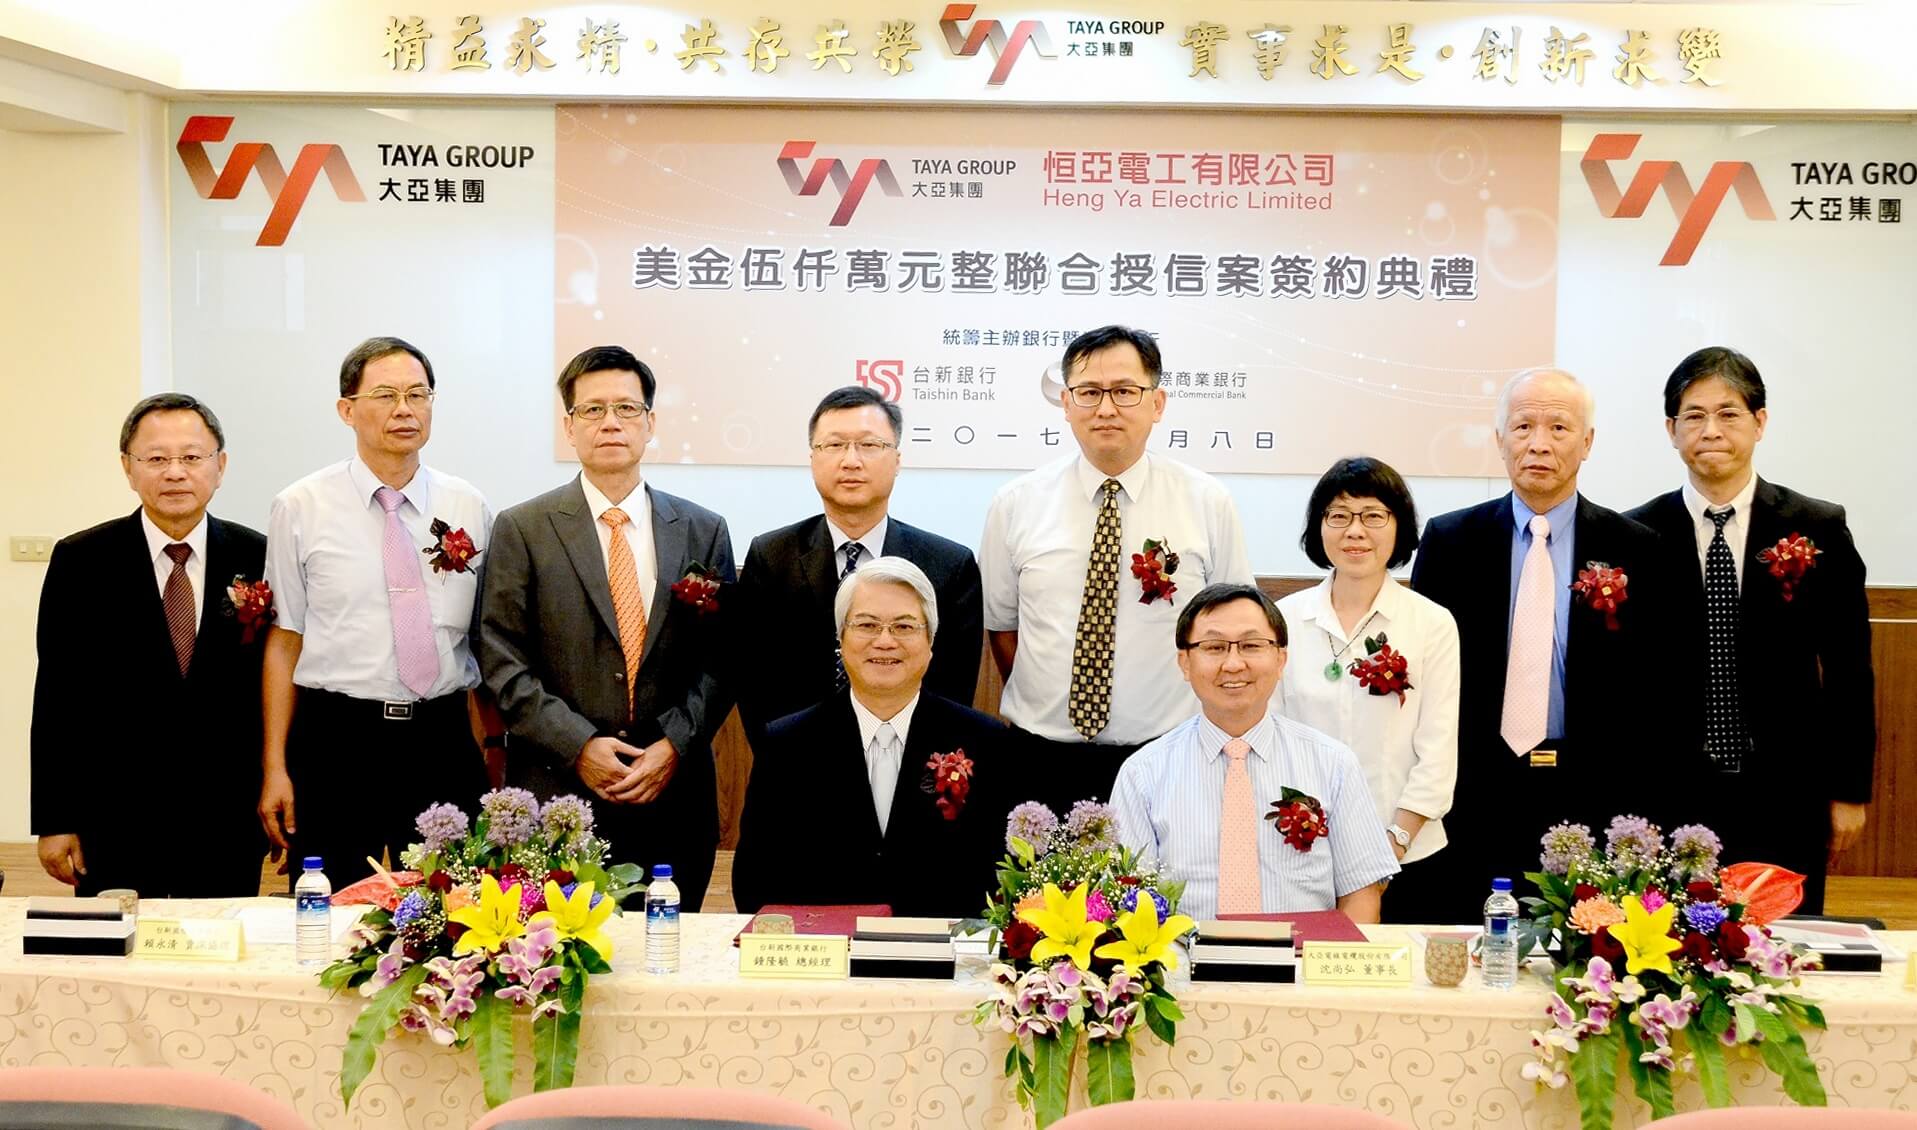 Heng Ya Electric Receives US$50 Million Syndicated Loan; Ta Ya Group’s Operating Performance This Year is Much Anticipated